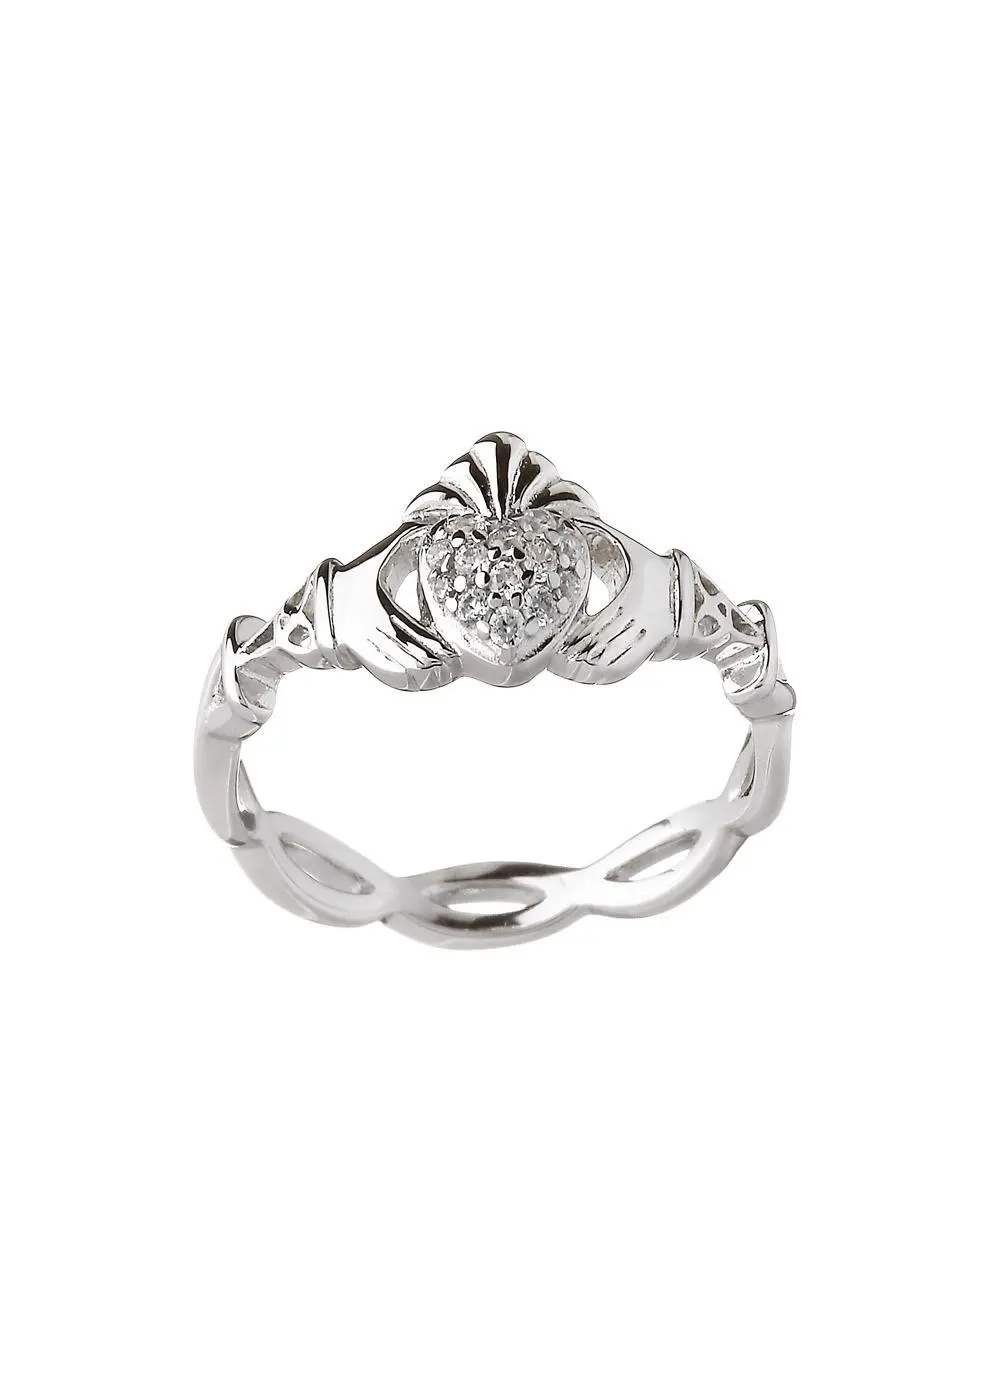 Sterling Silver Pave Set Claddagh Ring